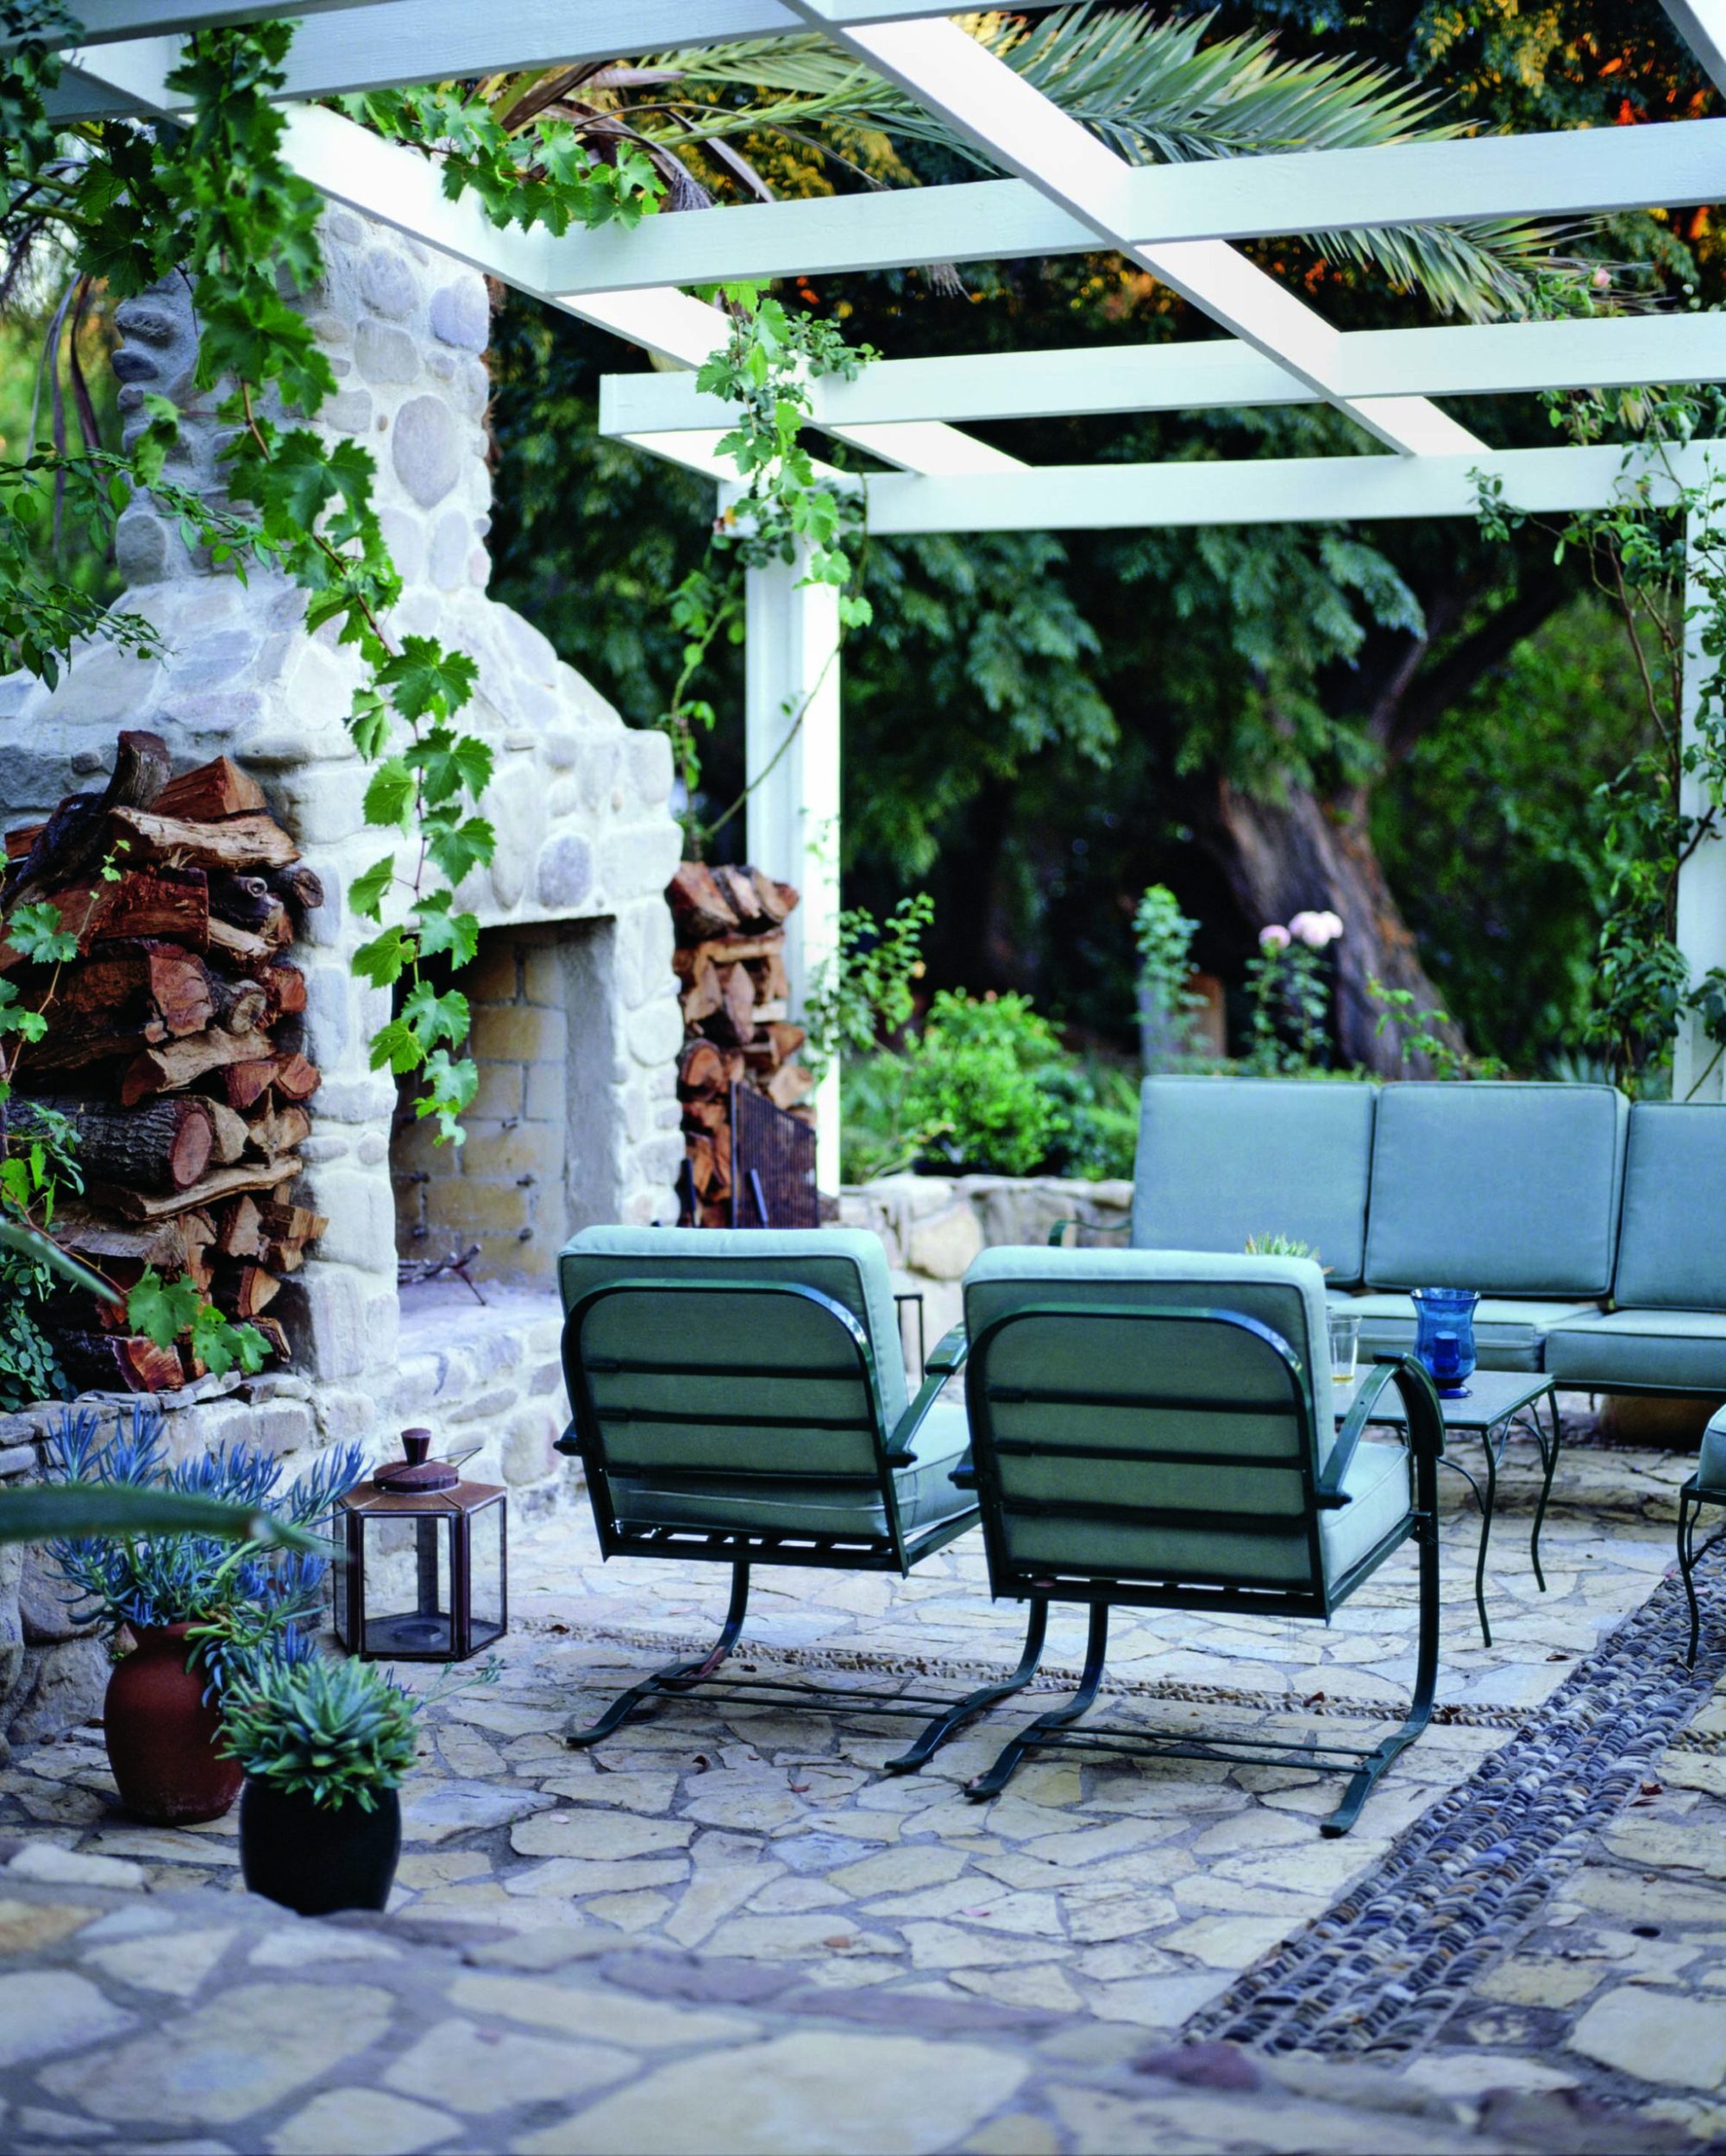 An outdoor stone fireplace with hanging plants and a seating area in front of the fireplace